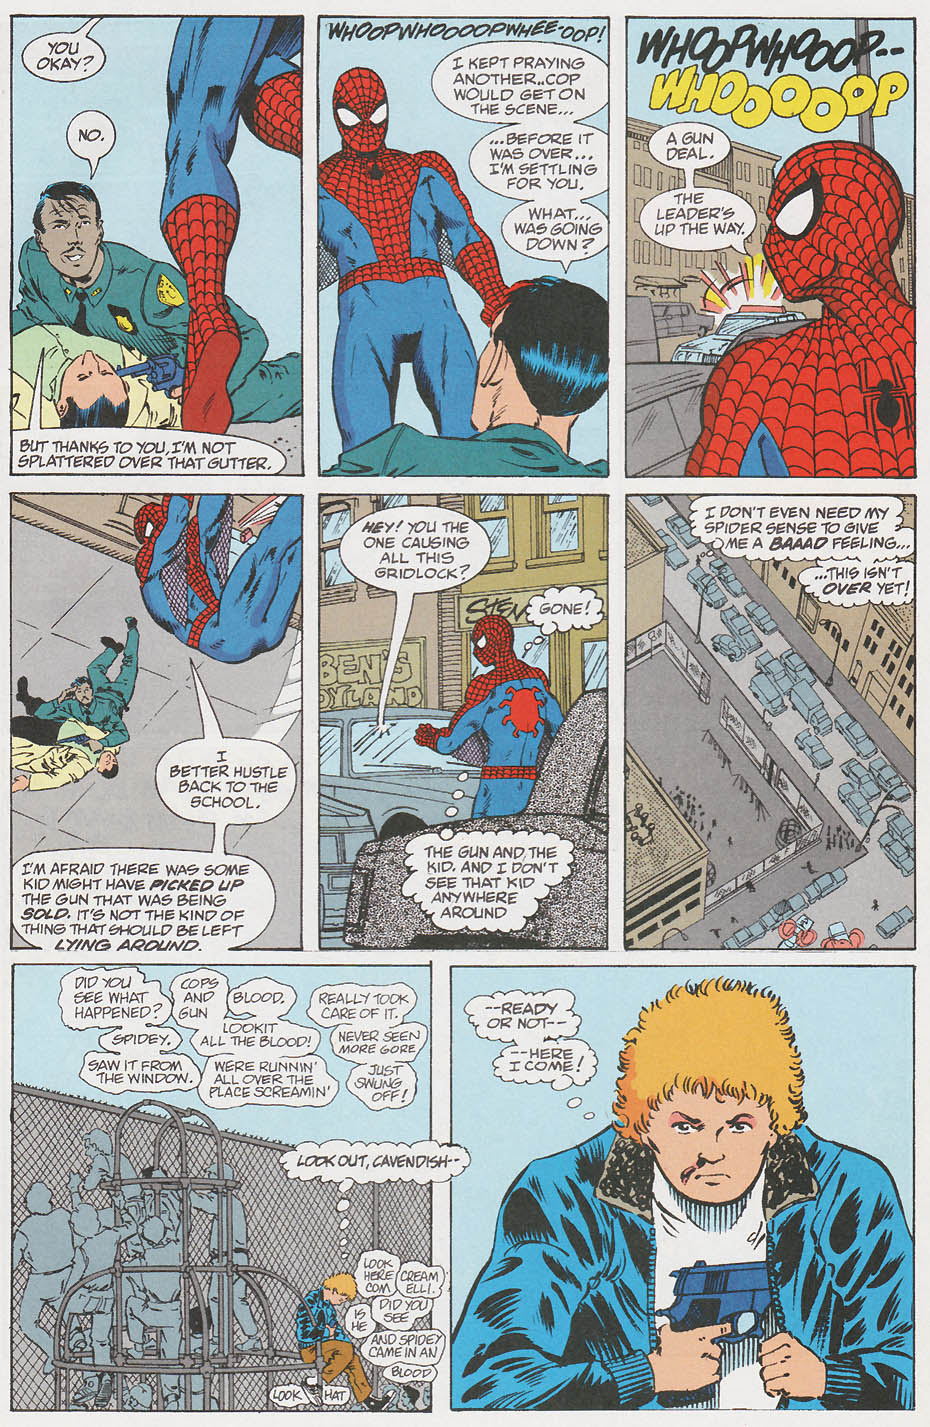 Spider-Man (1990) 27_-_Theres_Something_About_A_Gun_Part_1 Page 22